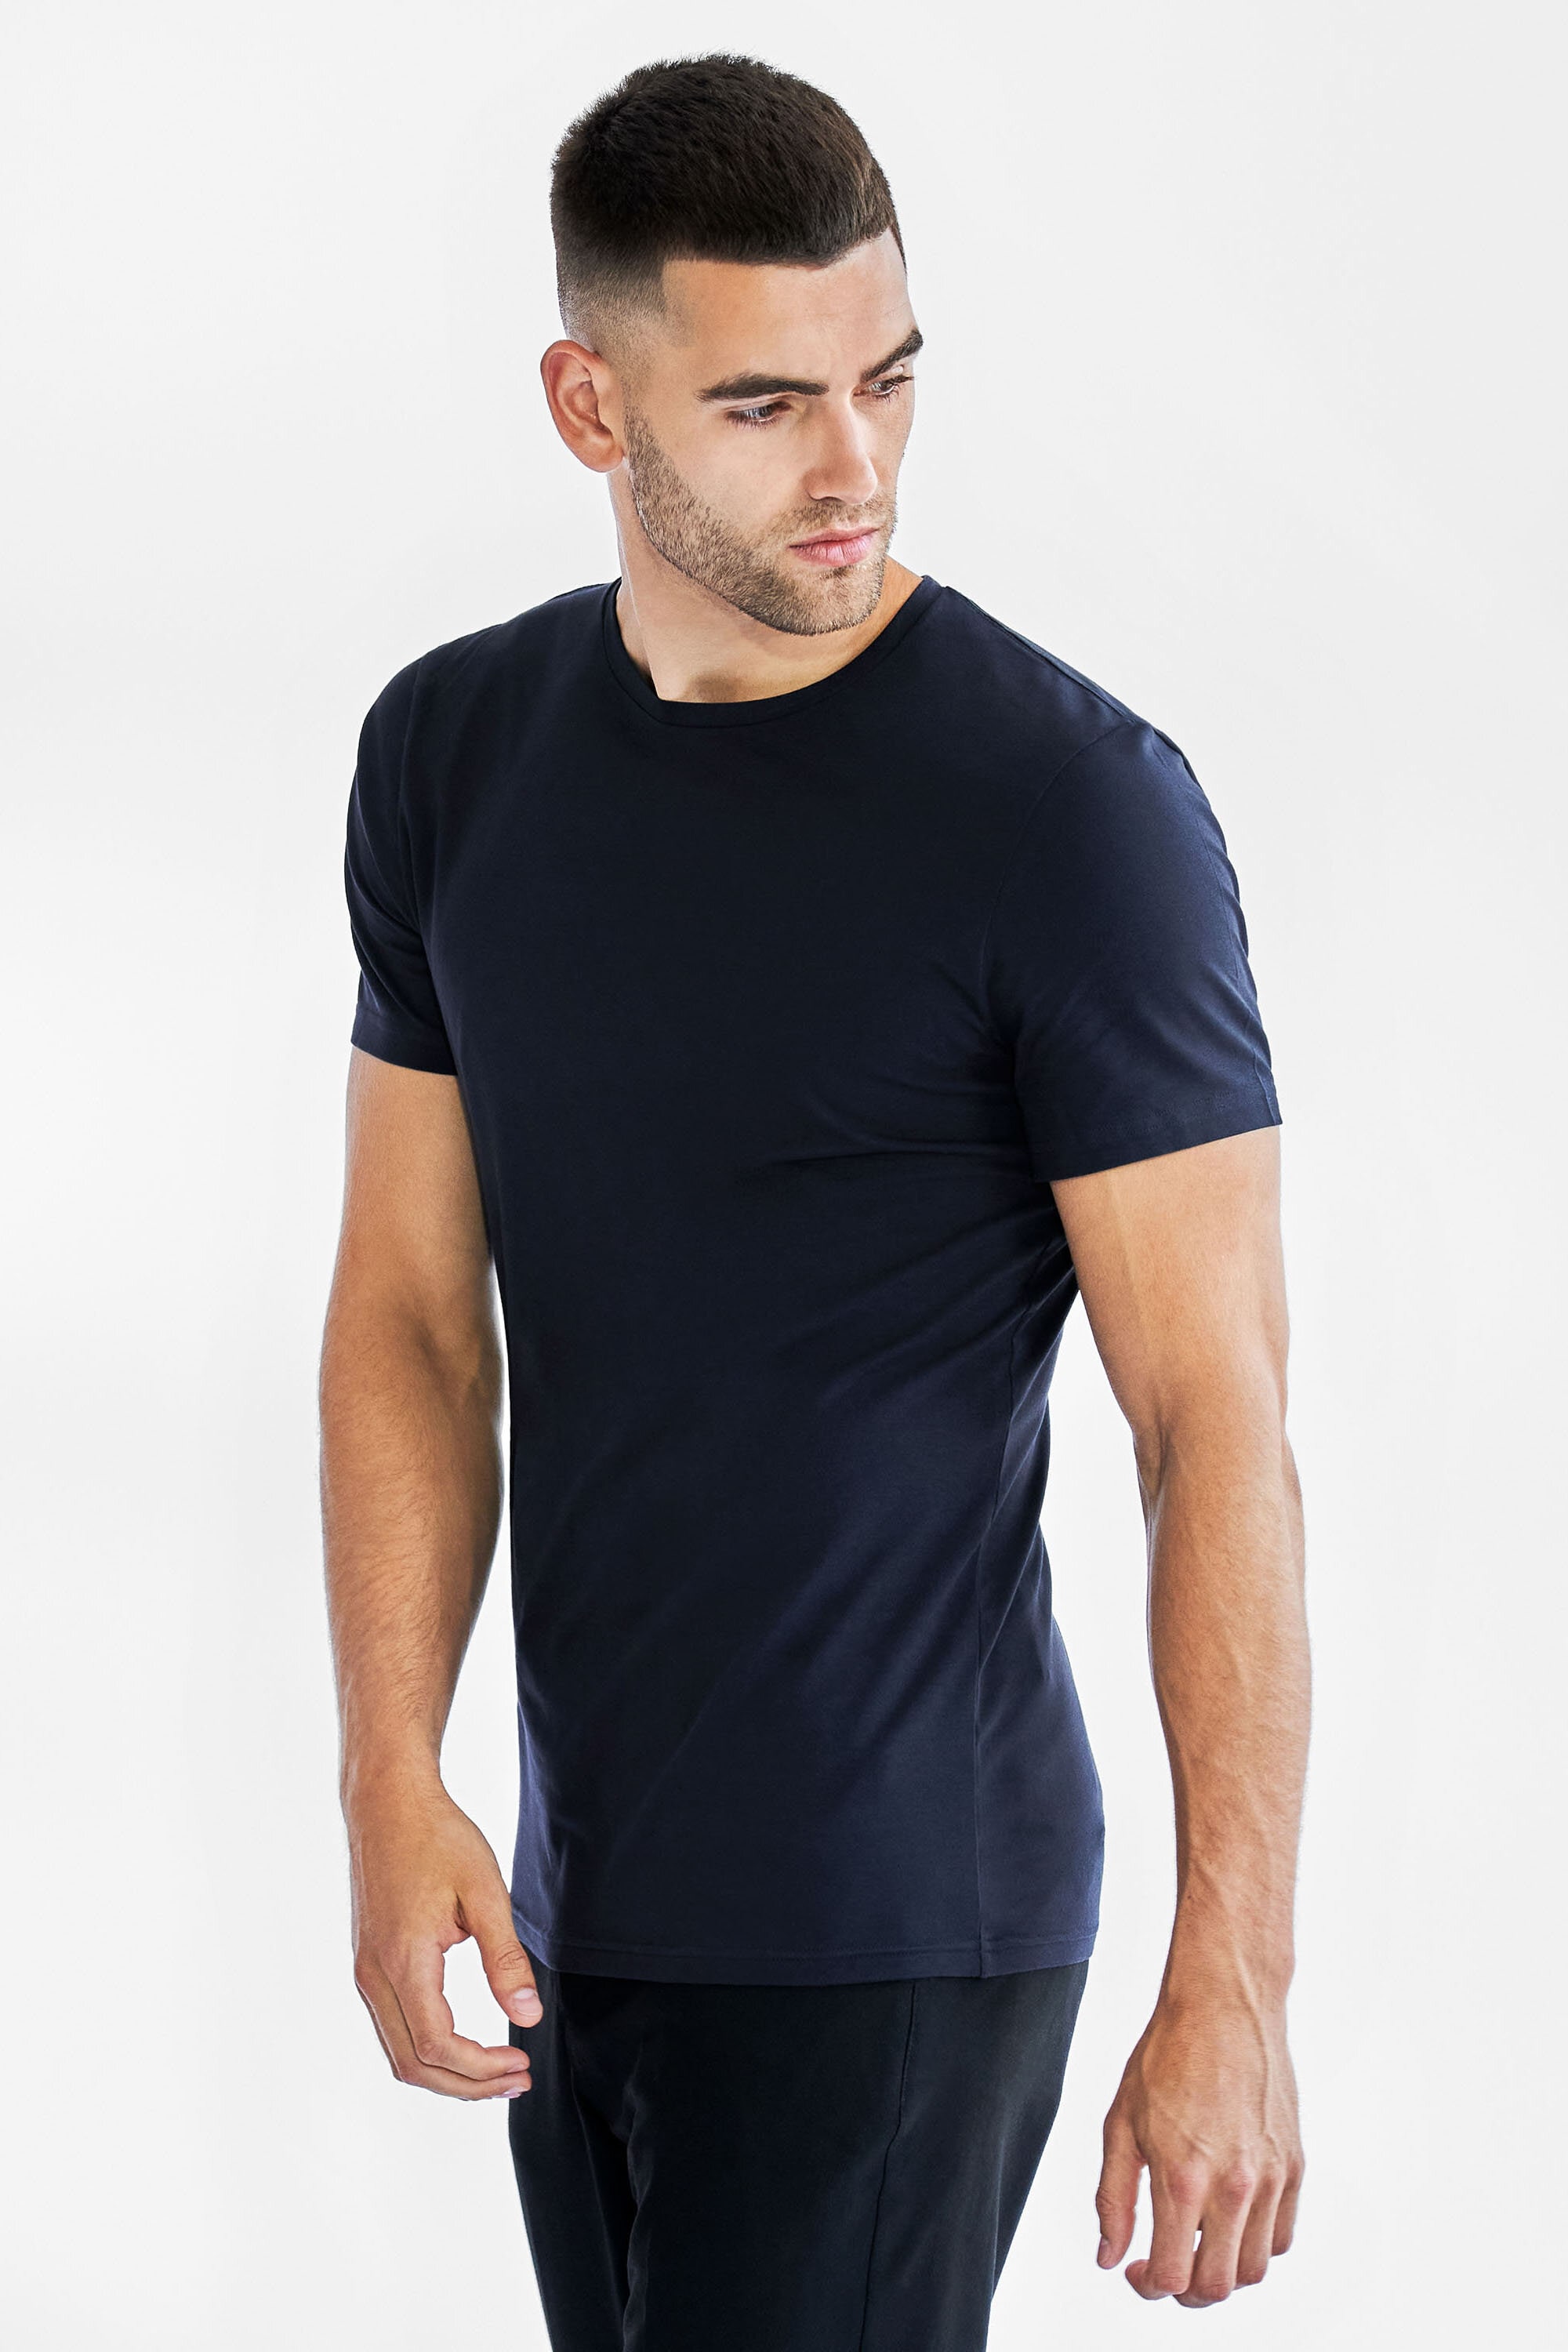 SALE EVENT Bread and Boxers V-Neck T-shirt Black 